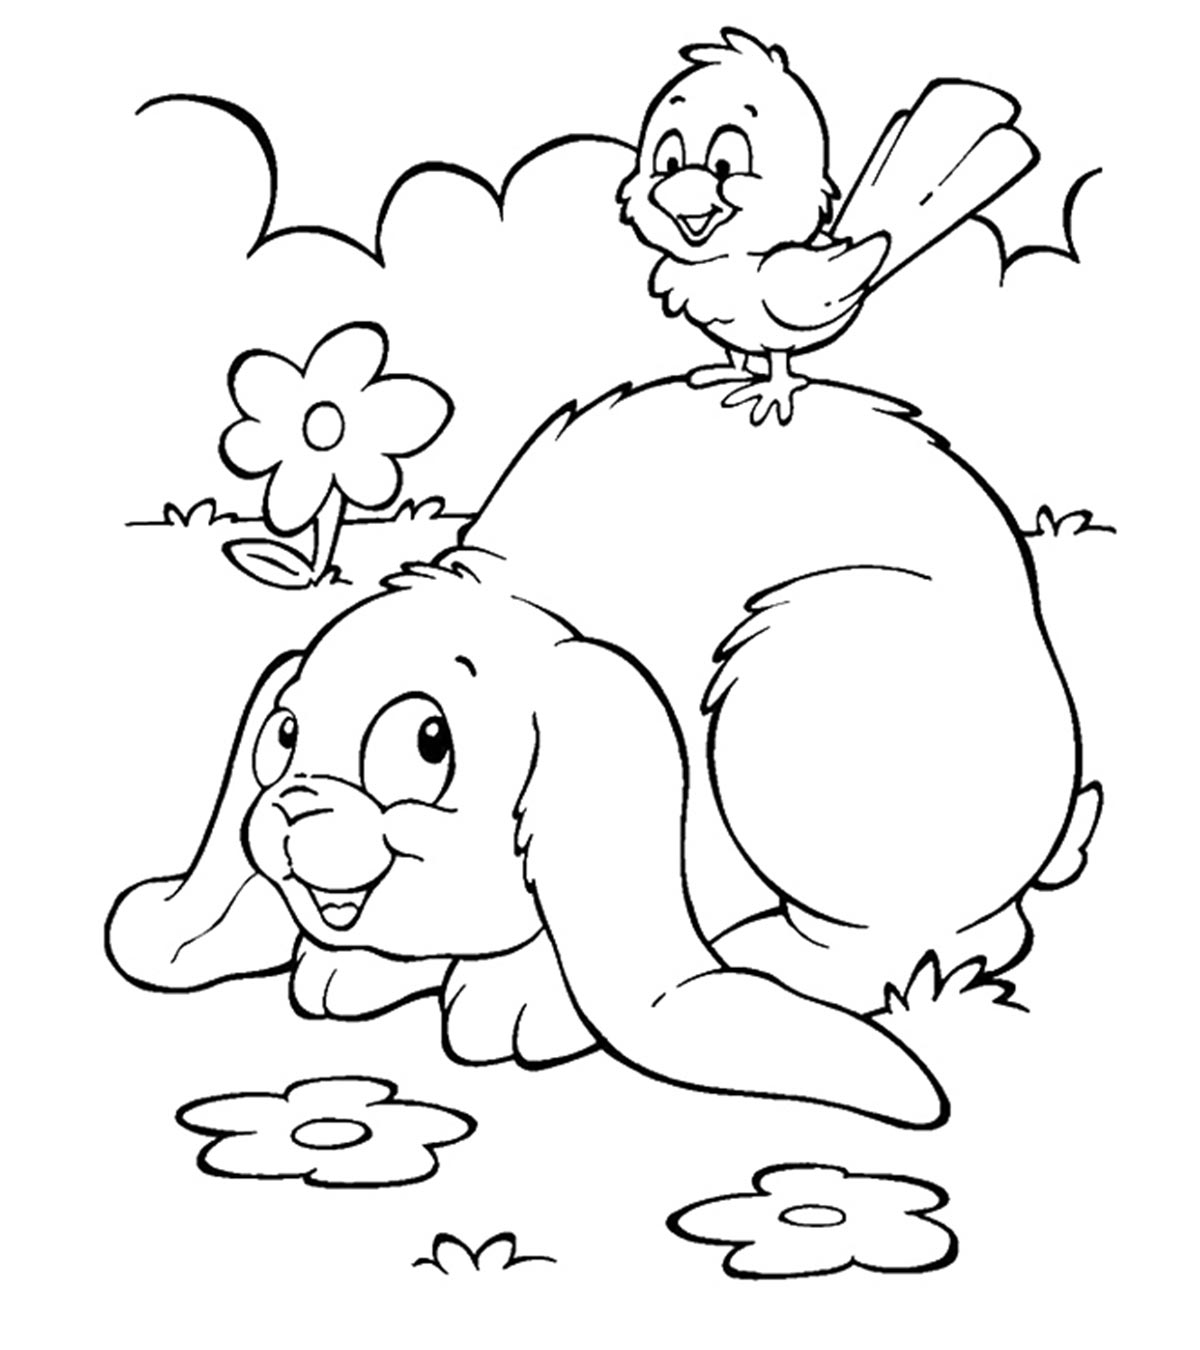 Top 15 Bunny Coloring Pages Your Toddler Will Love To Color